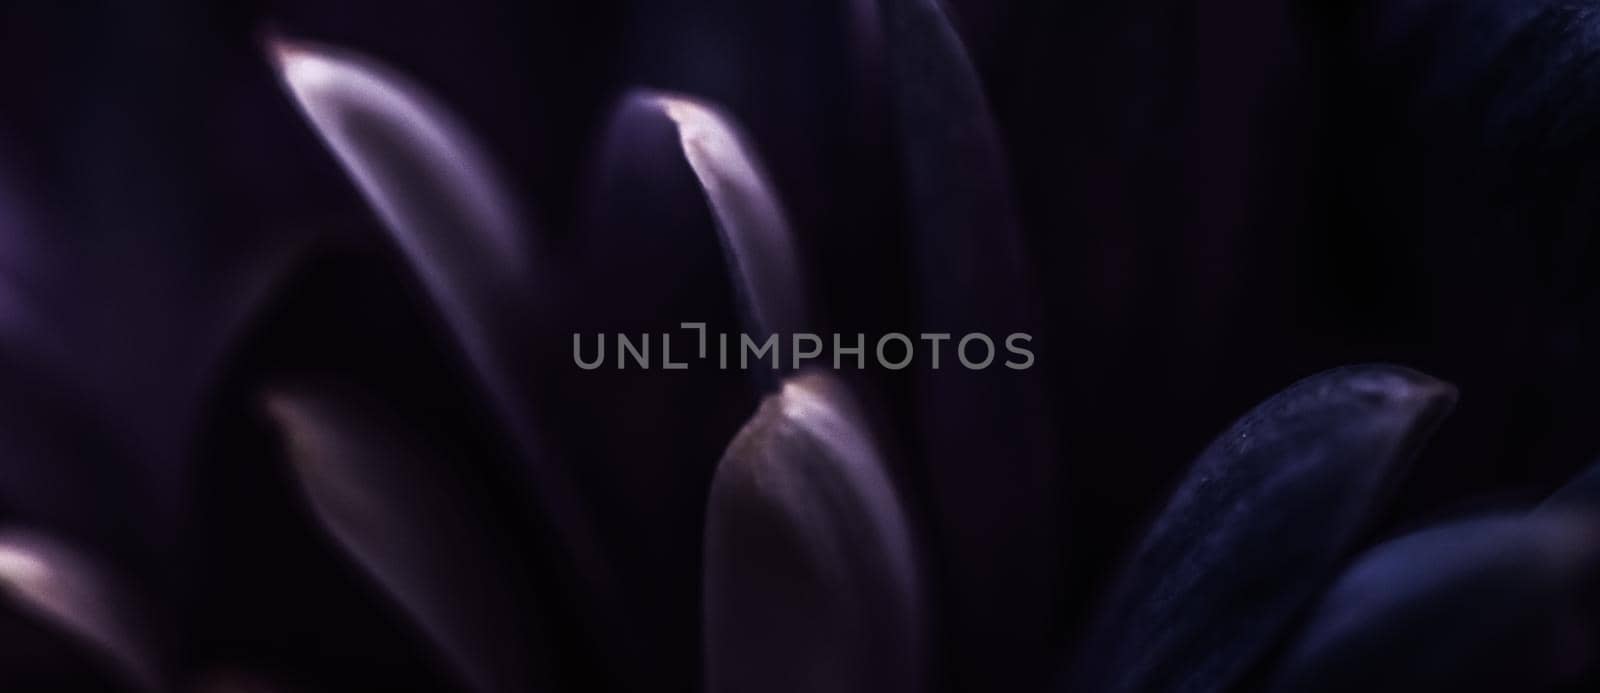 Purple daisy flower petals in bloom, abstract floral blossom art background, flowers in spring nature for perfume scent, wedding, luxury beauty brand holiday design by Anneleven